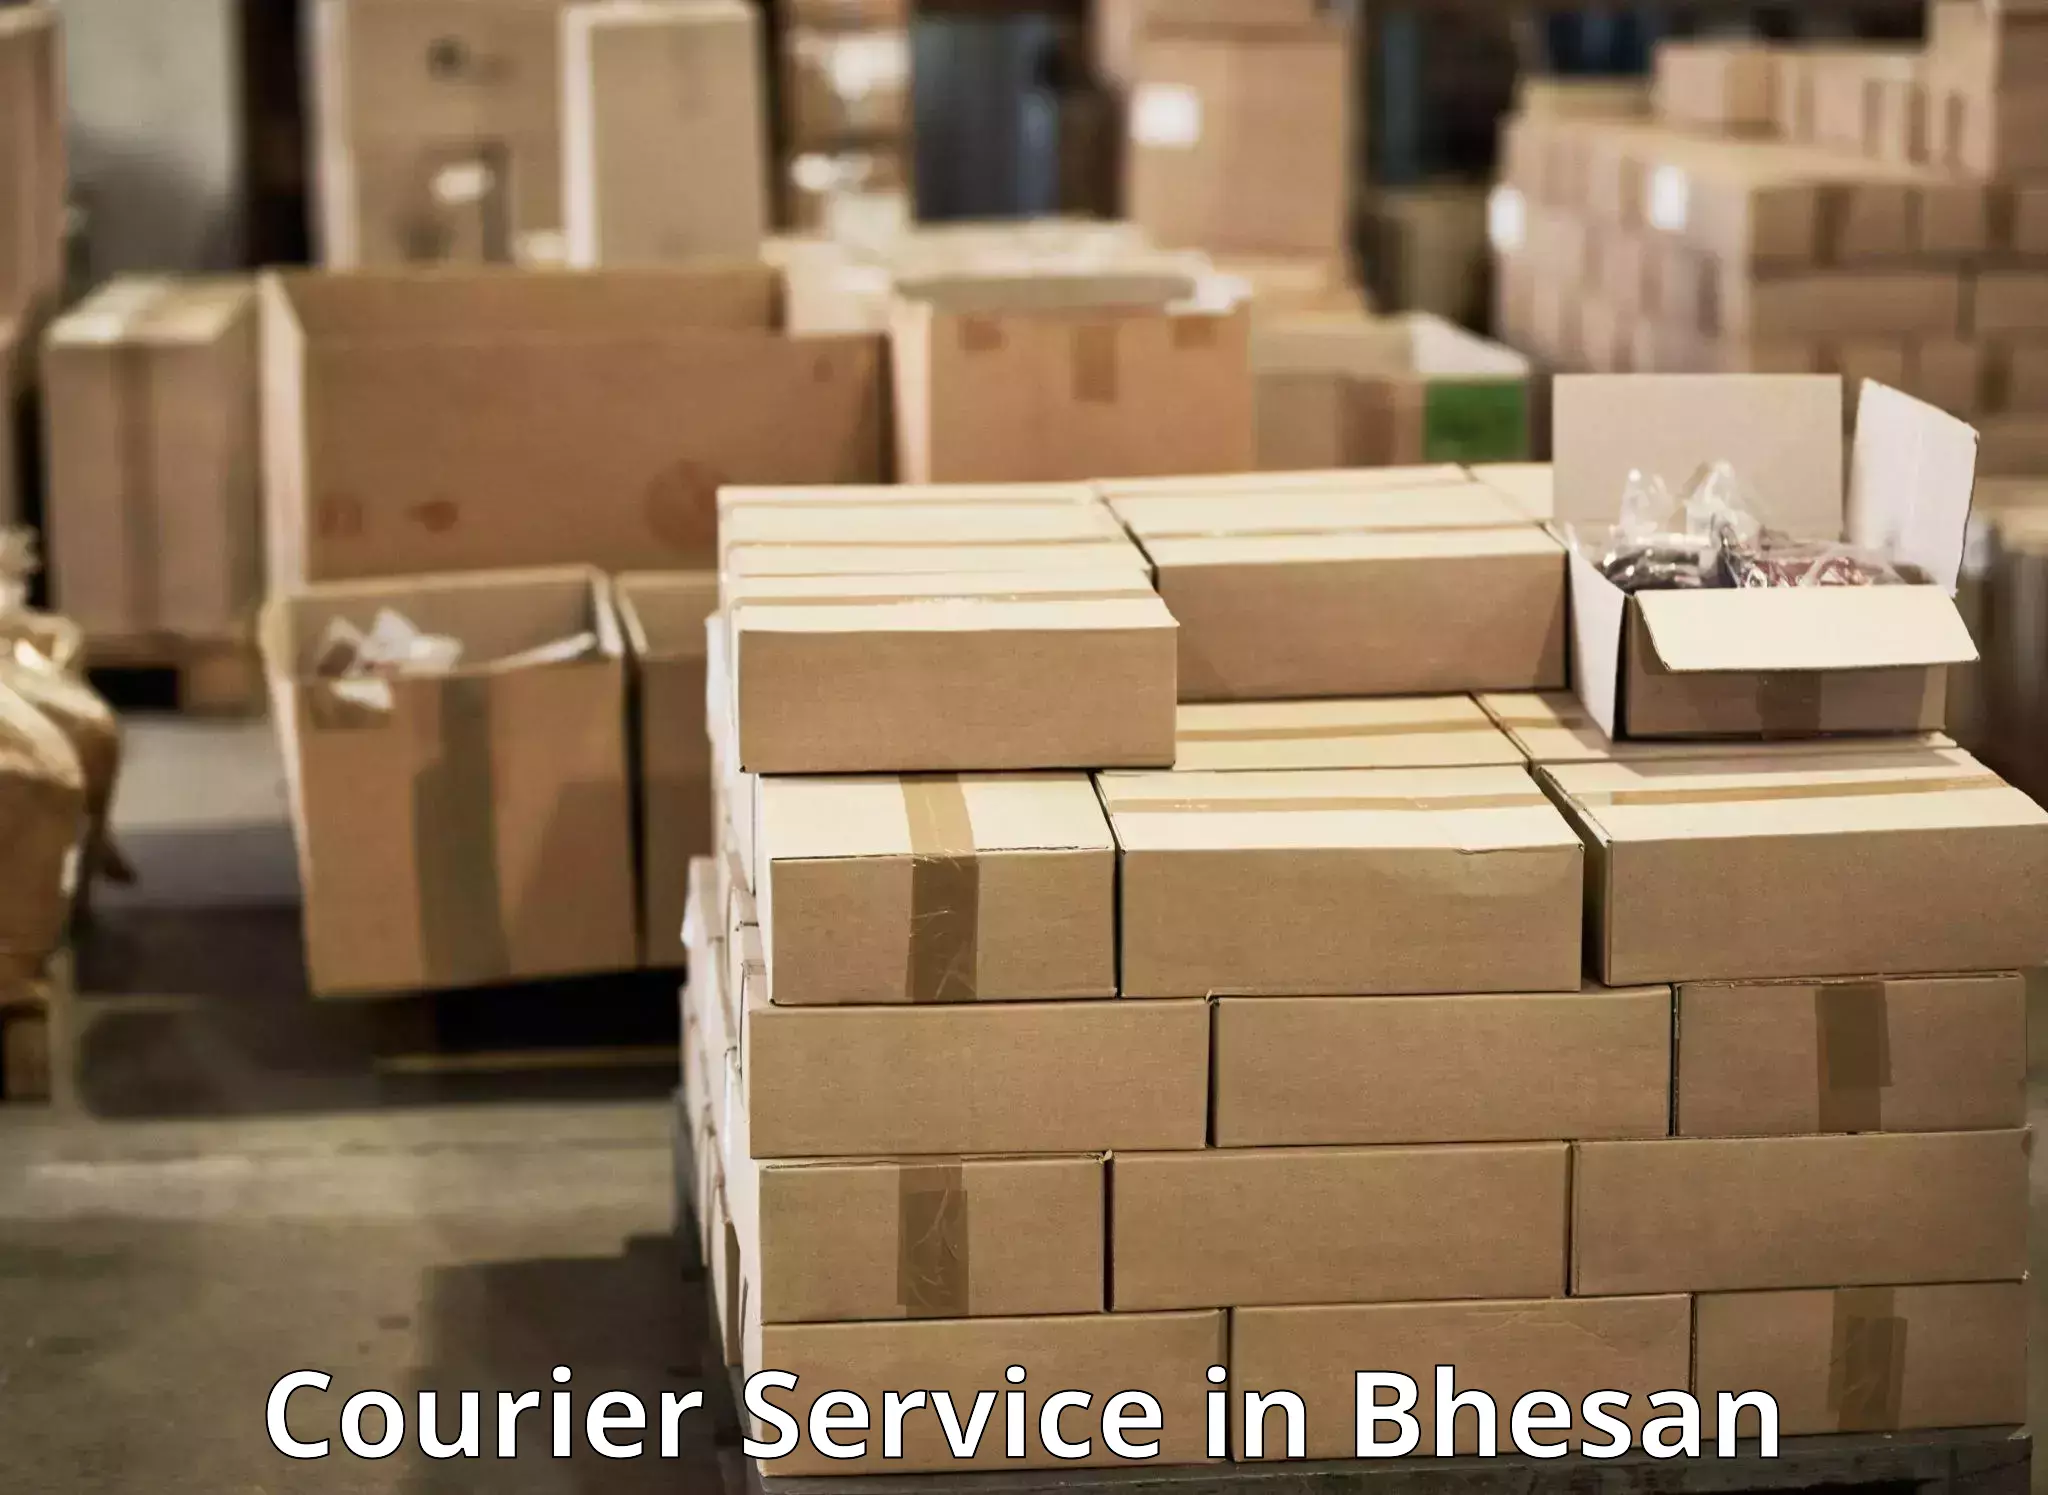 Personal courier services in Bhesan